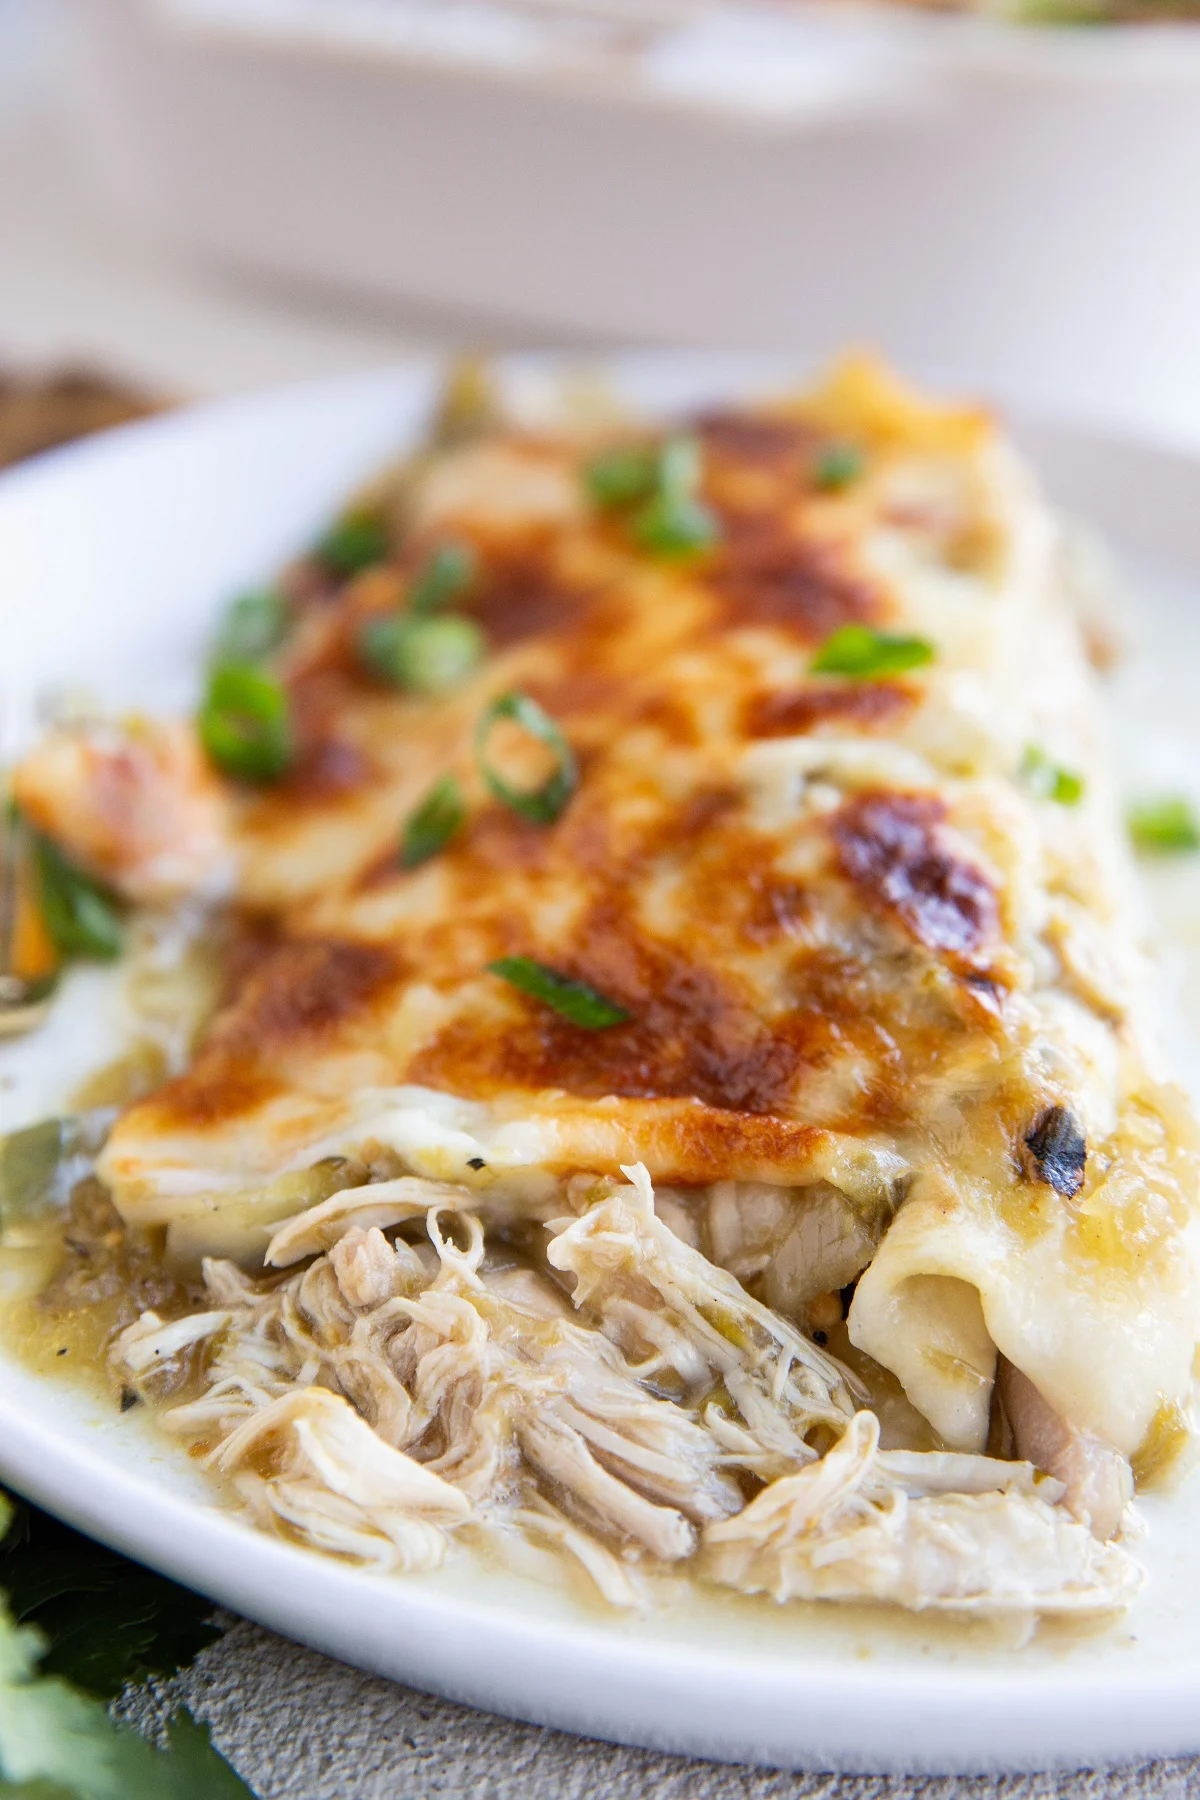 Chili Verde Shredded Chicken Enchiladas with homemade green salsa | theroastedroot.net #mexican #recipe